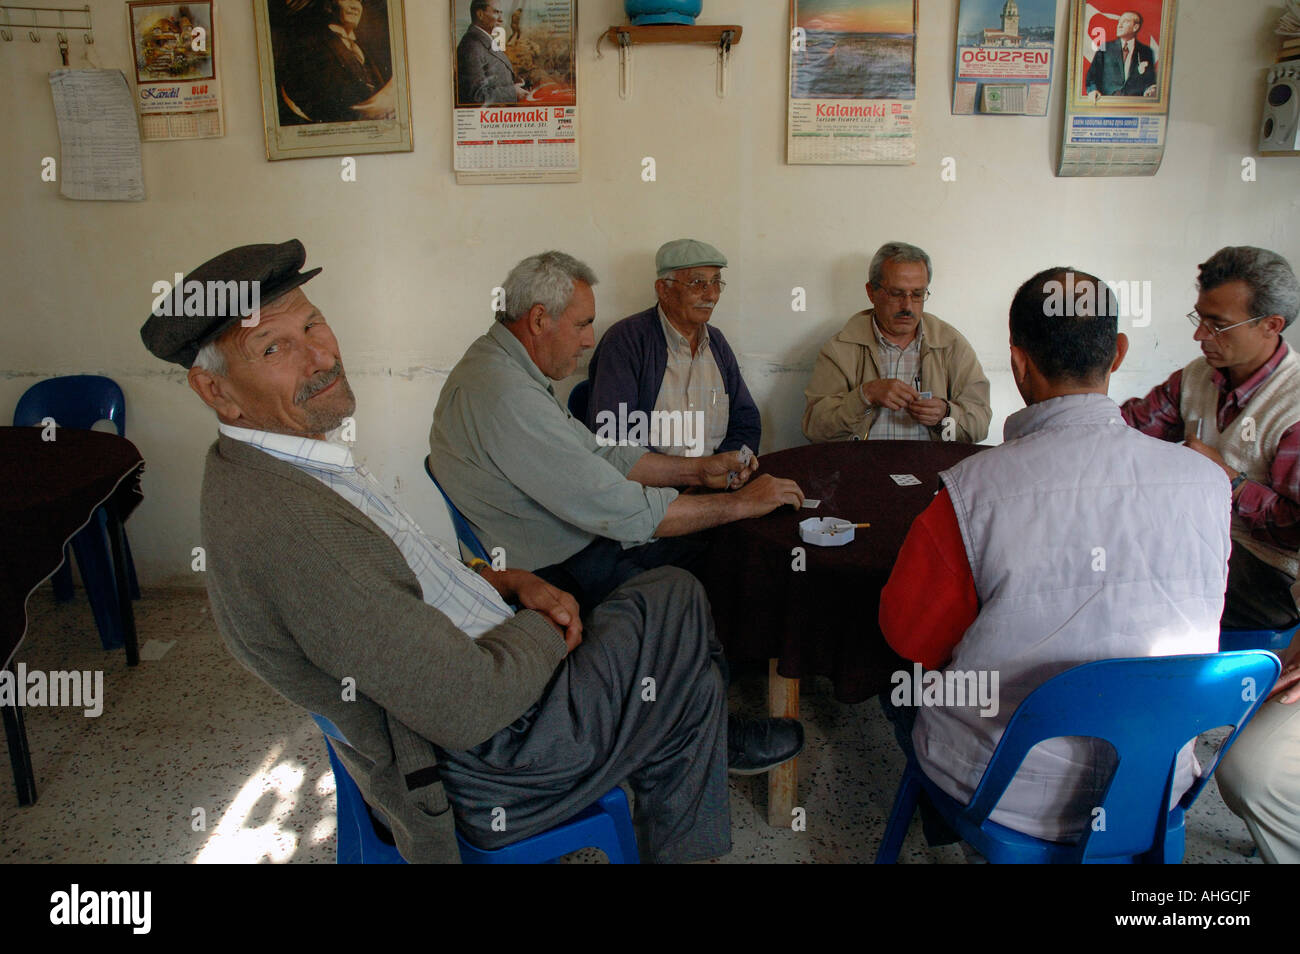 Turkish men in village cafe playing games and sitting about socialising Stock Photo